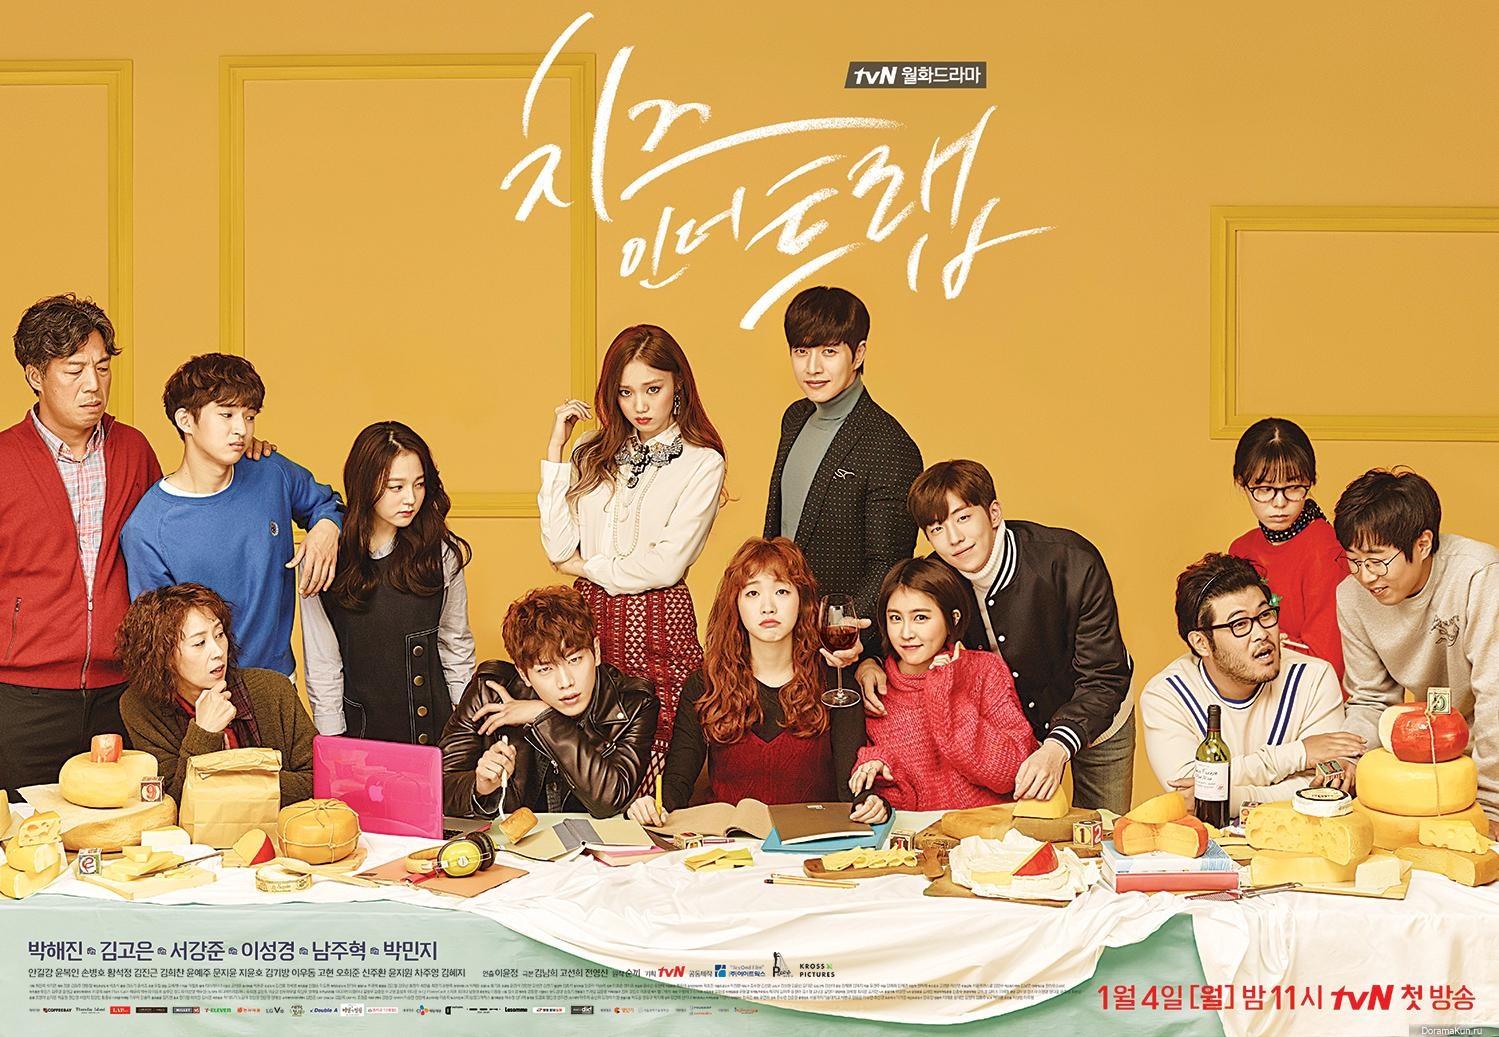 Сыр в мышеловке/Cheese in the trap (2016) - Страница 2 Cheese-in-the-Trap-Poster5-1499